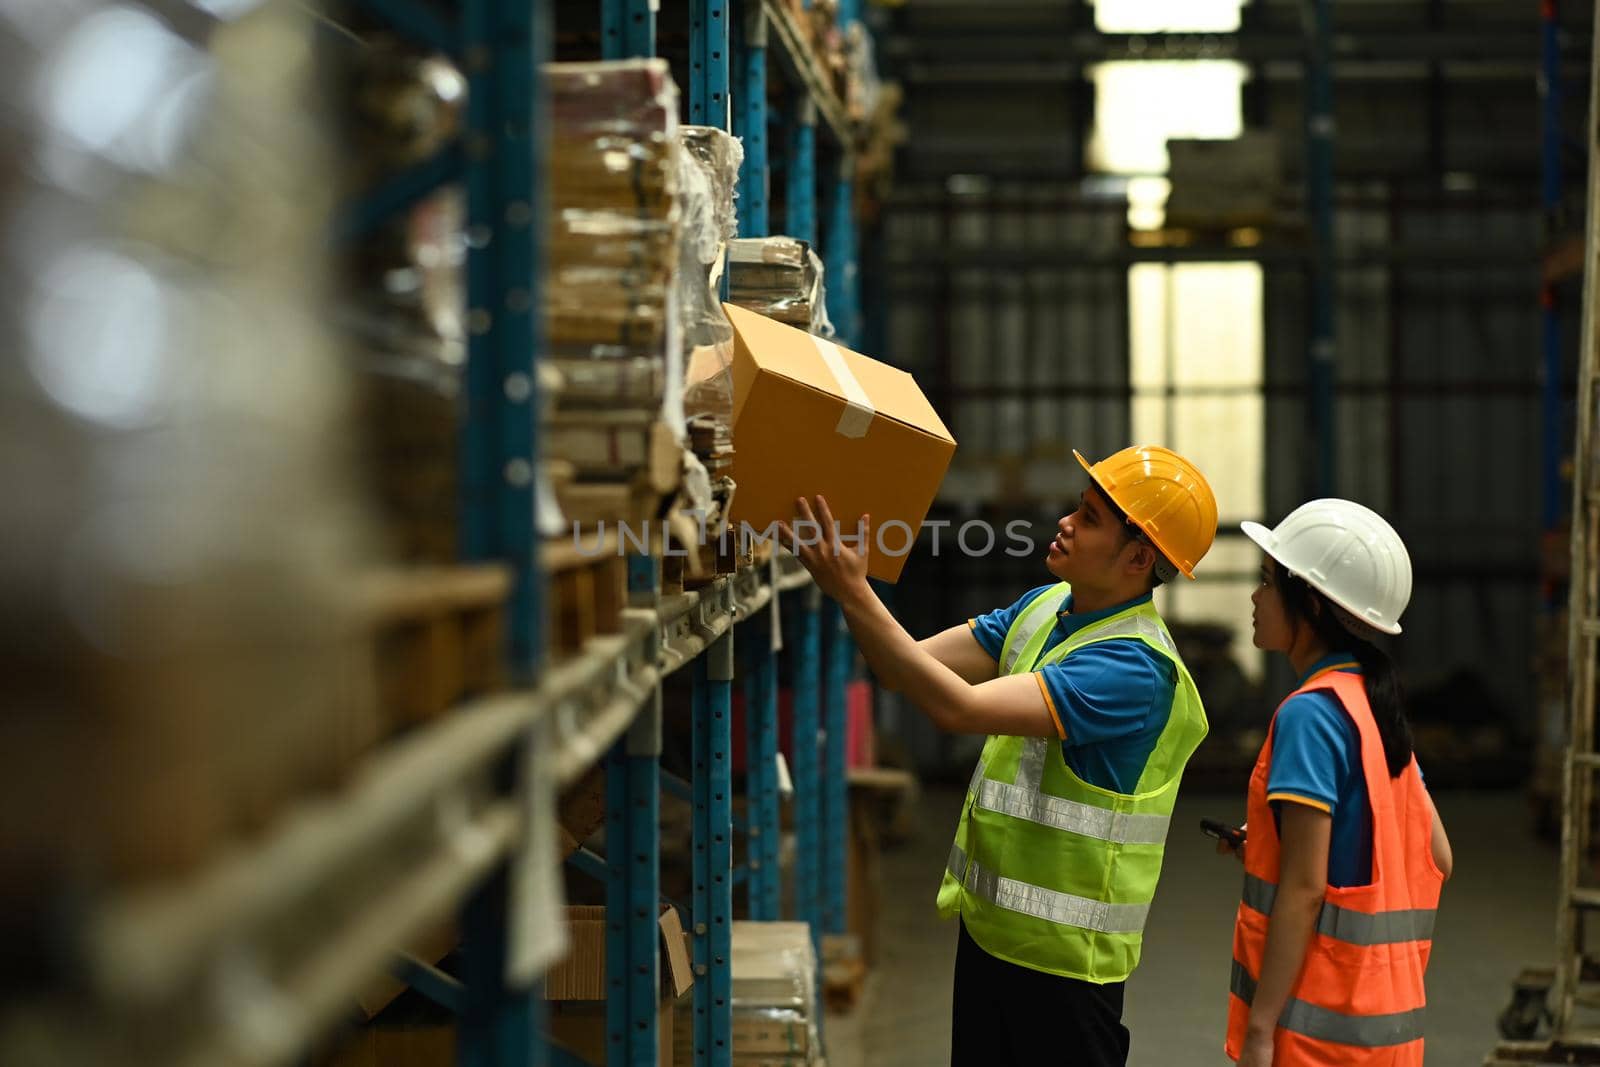 Two storehouse employees wearing hard hats and reflective jackets loading or unloading boxes on the shelf in warehouse.